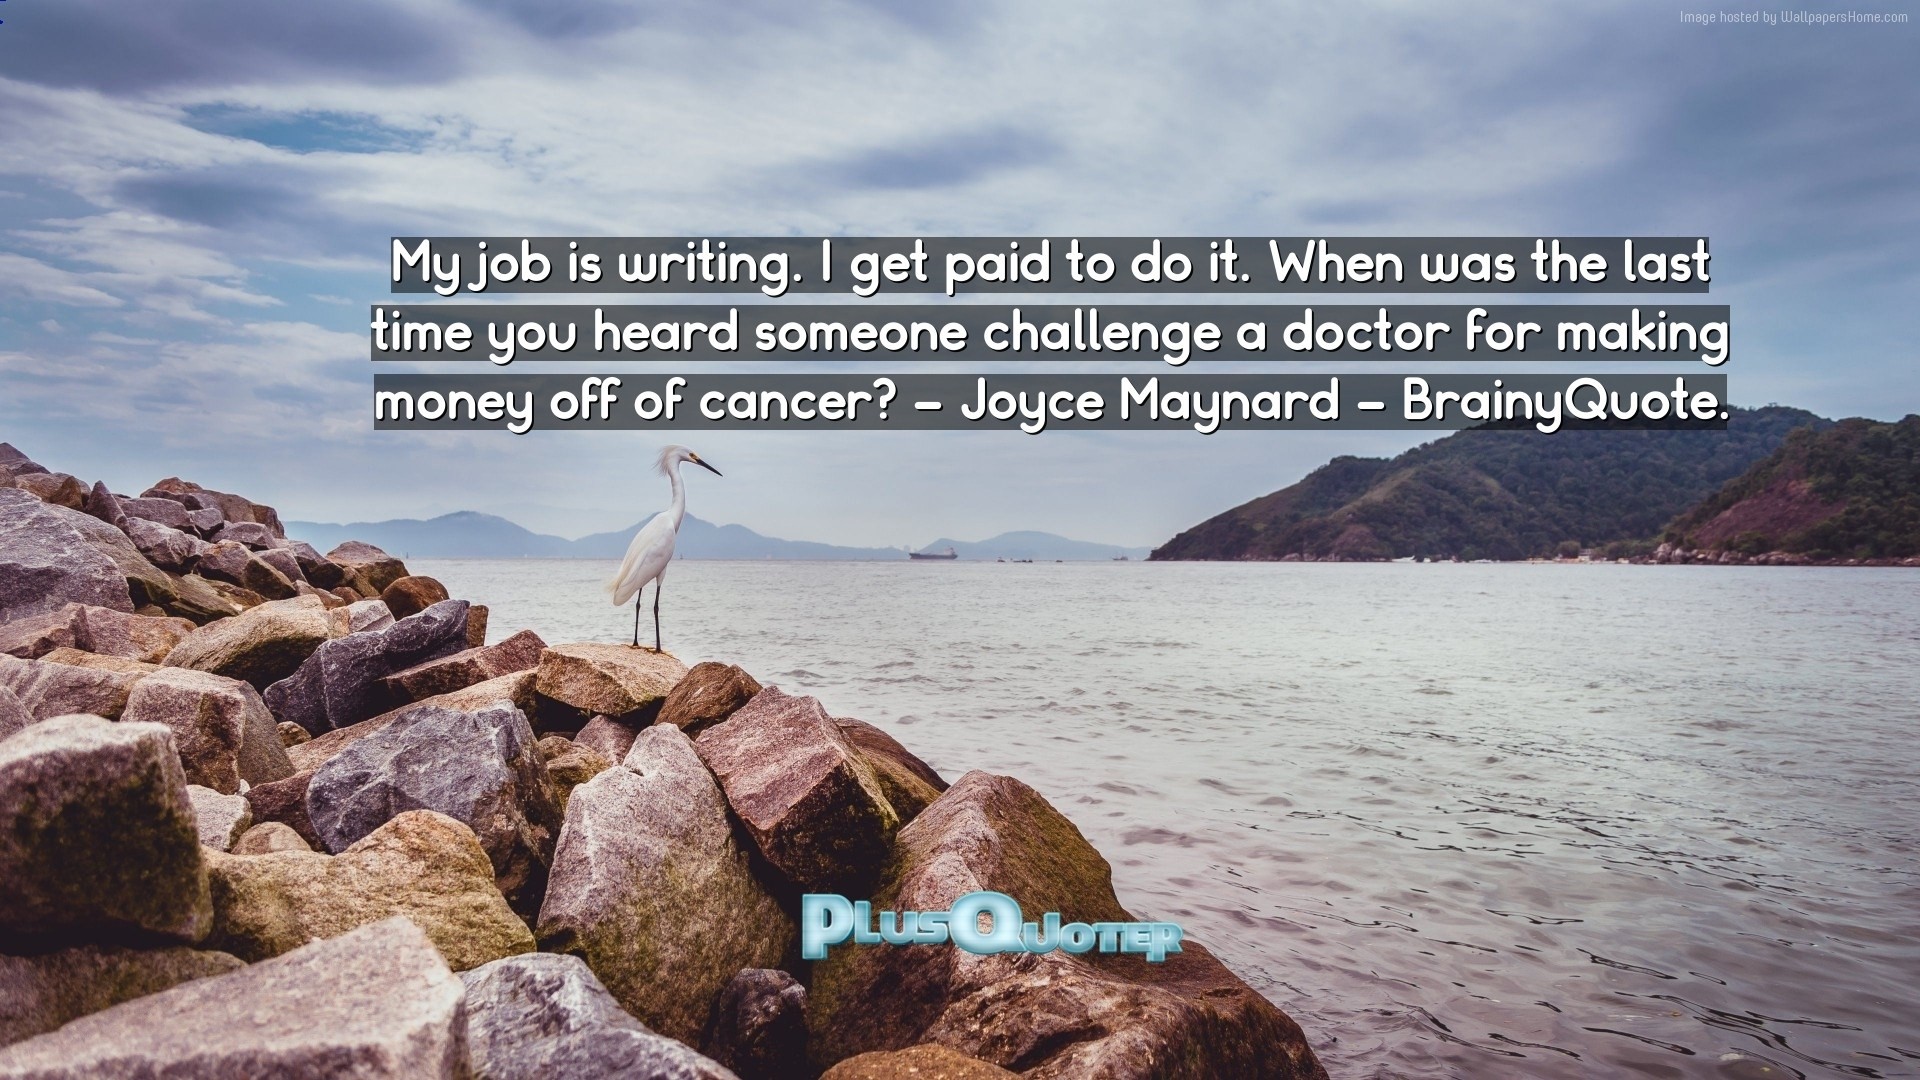 1920x1080 Download Wallpaper with inspirational Quotes- "My job is writing. I get  paid to. “